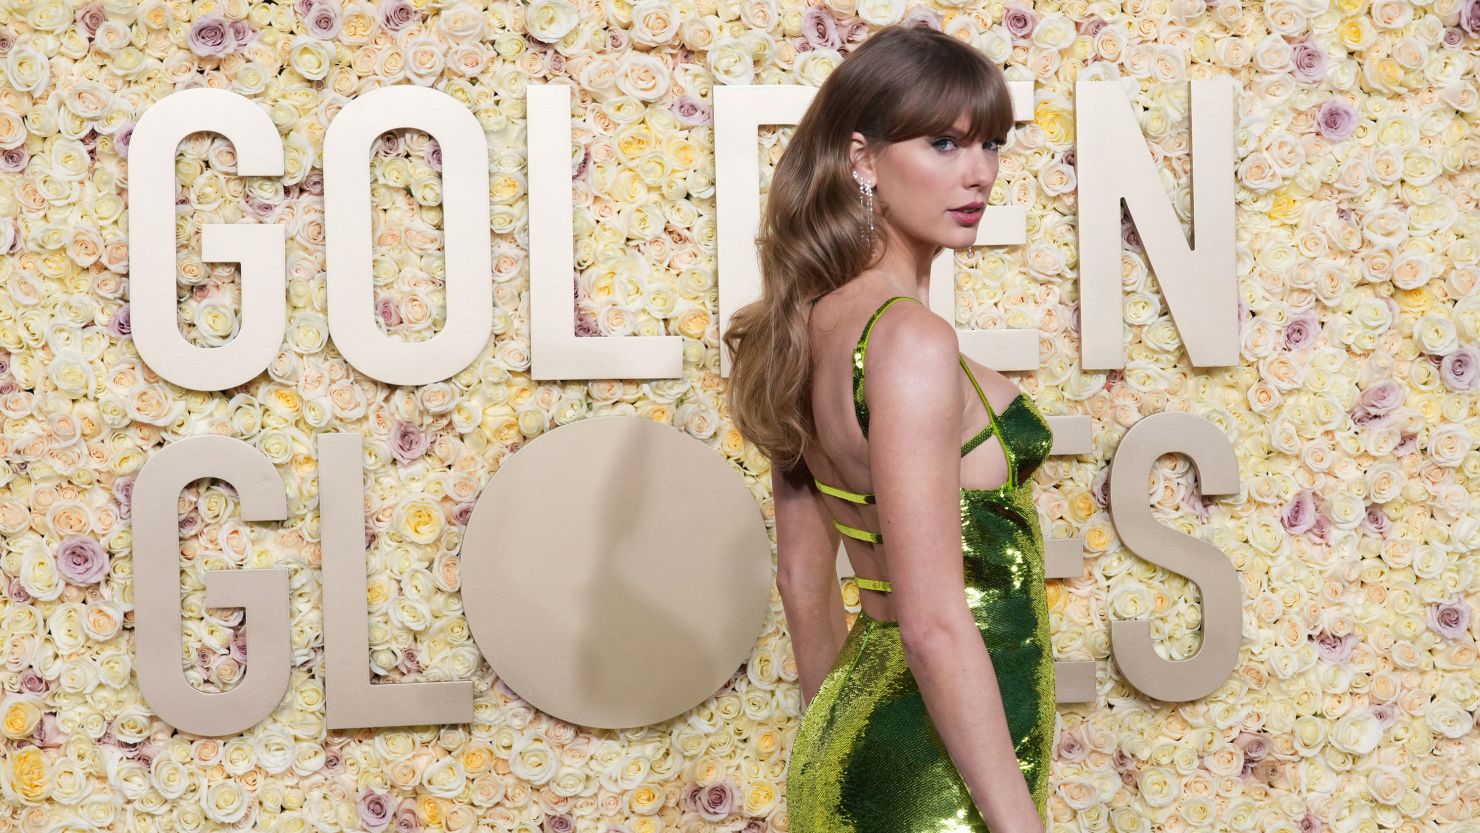 Taylor Swift looks chic in green on Golden Globes red carpet